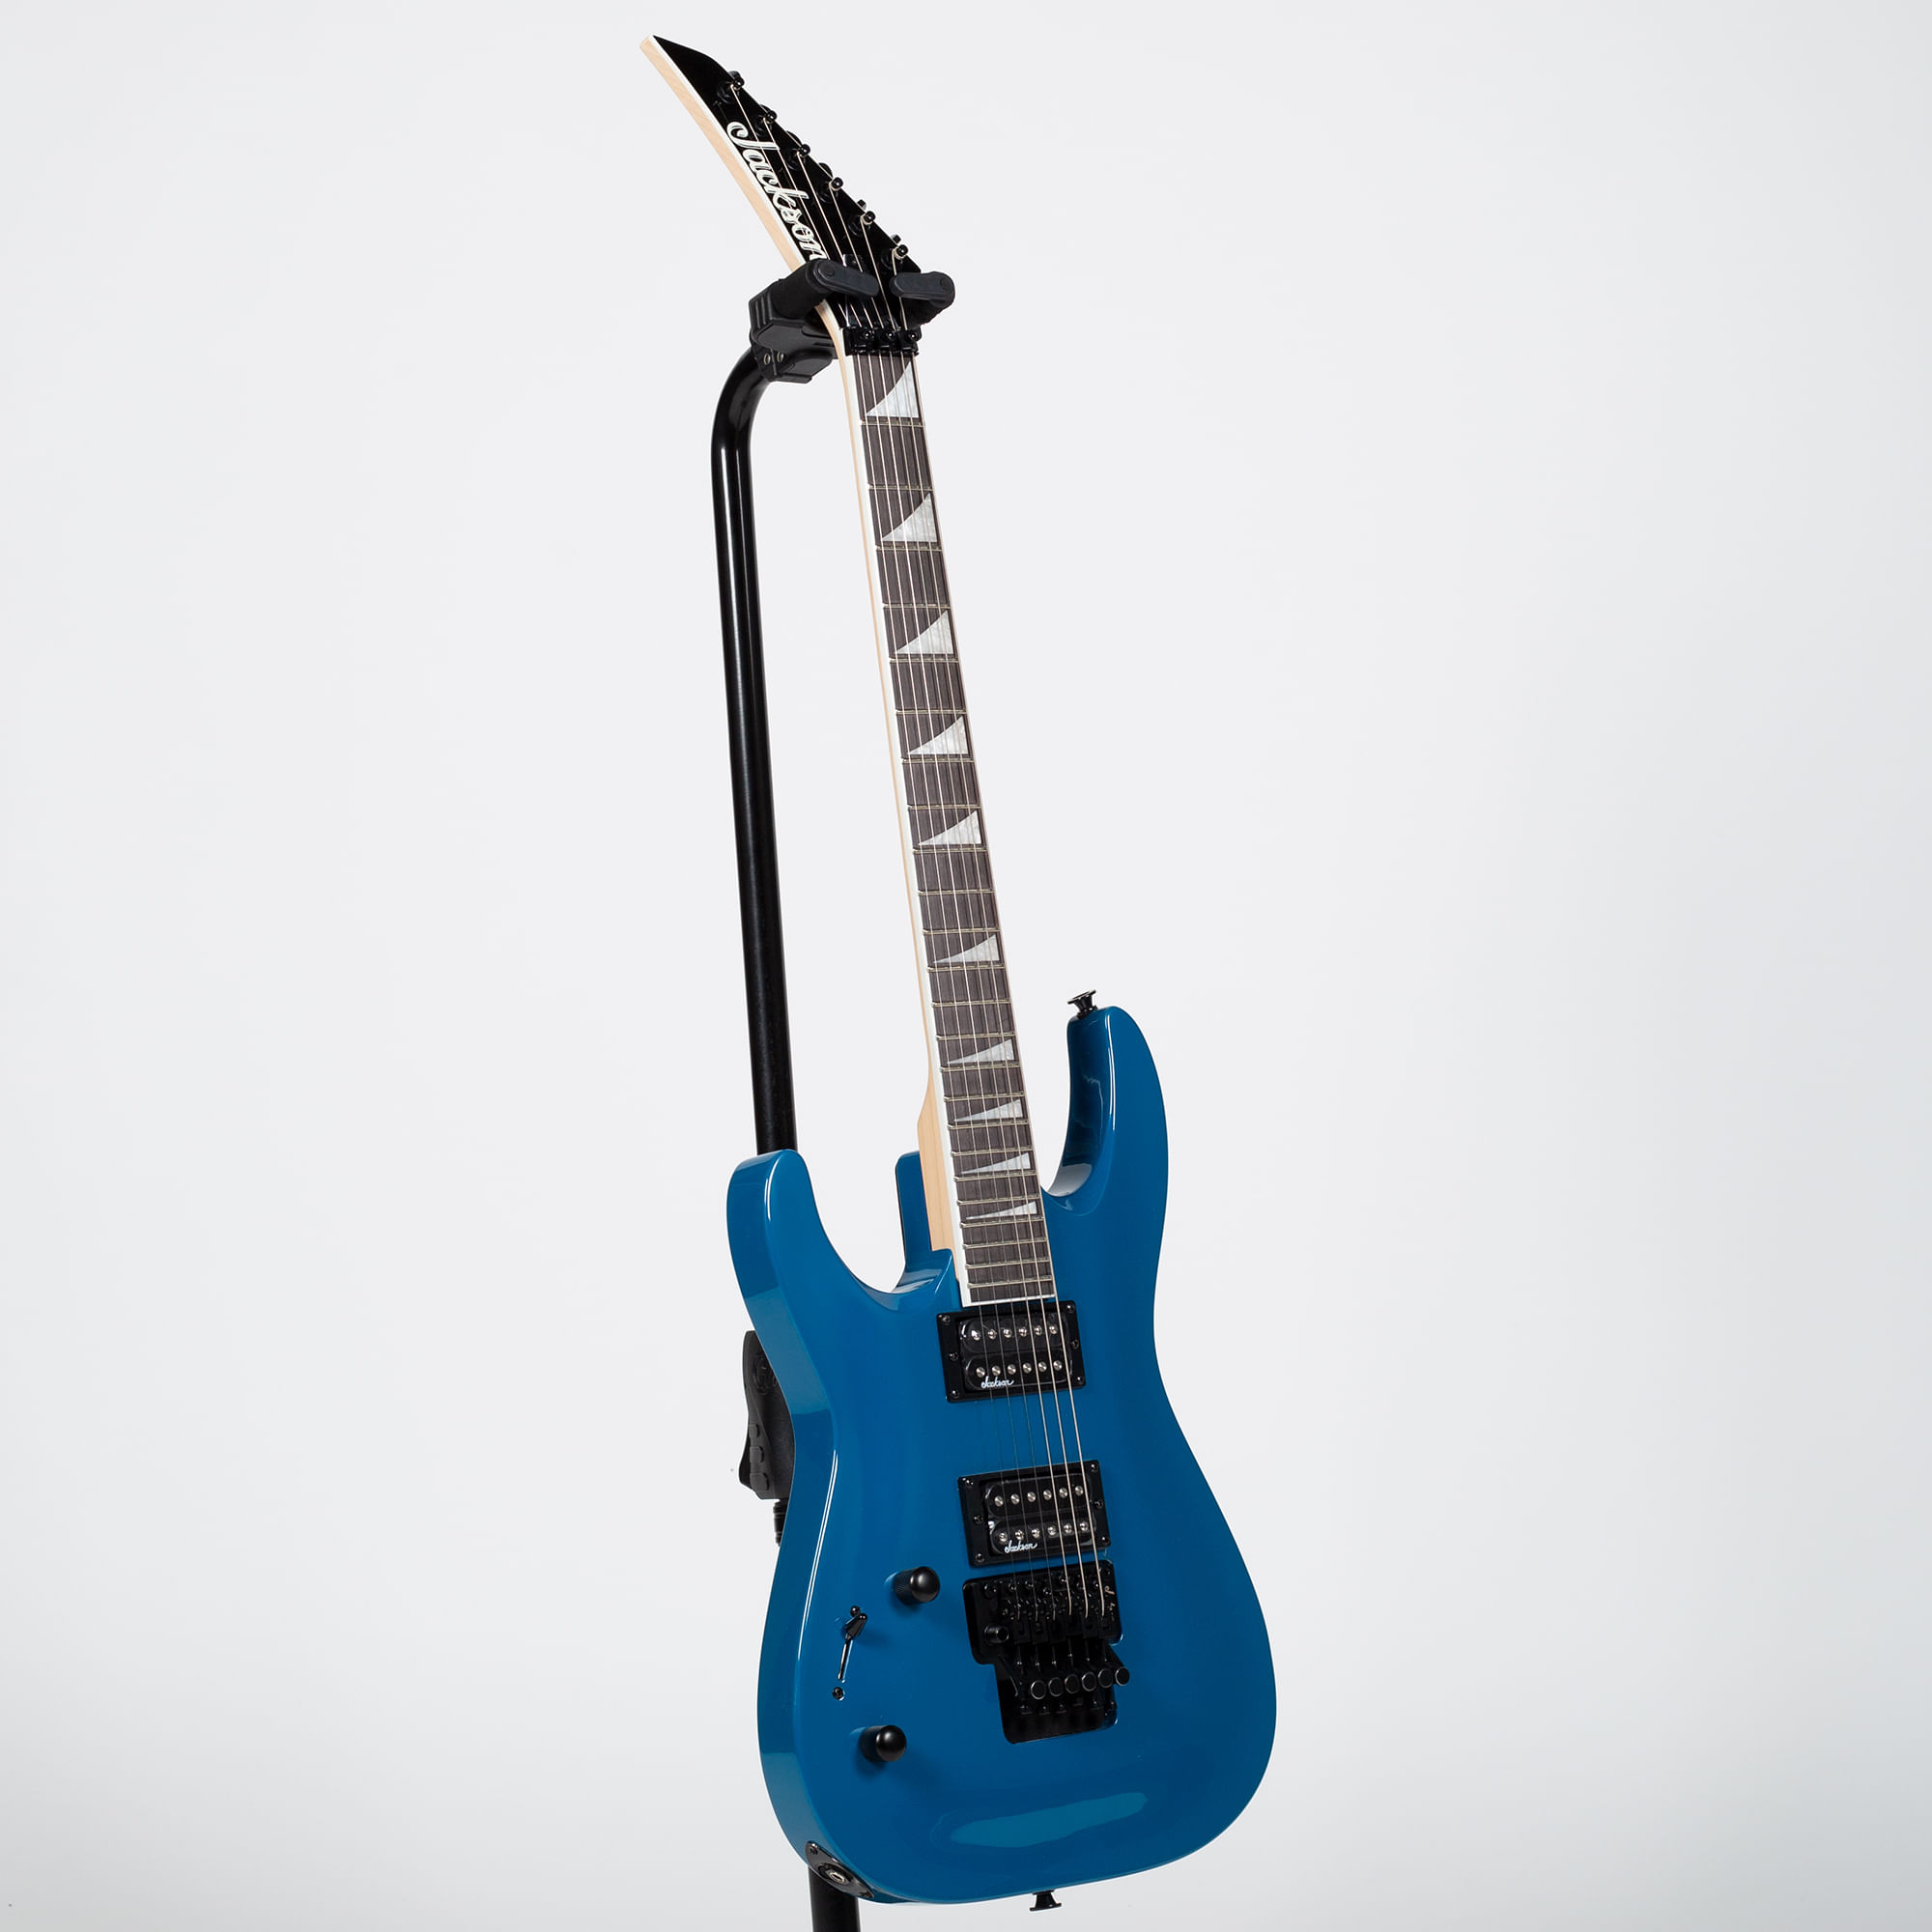 Cosmo　Left　Dinky　Top　Bright　Blue,　JS32　Electric　Amaranth,　Guitar　Arch　Jackson　Series　JS　Music